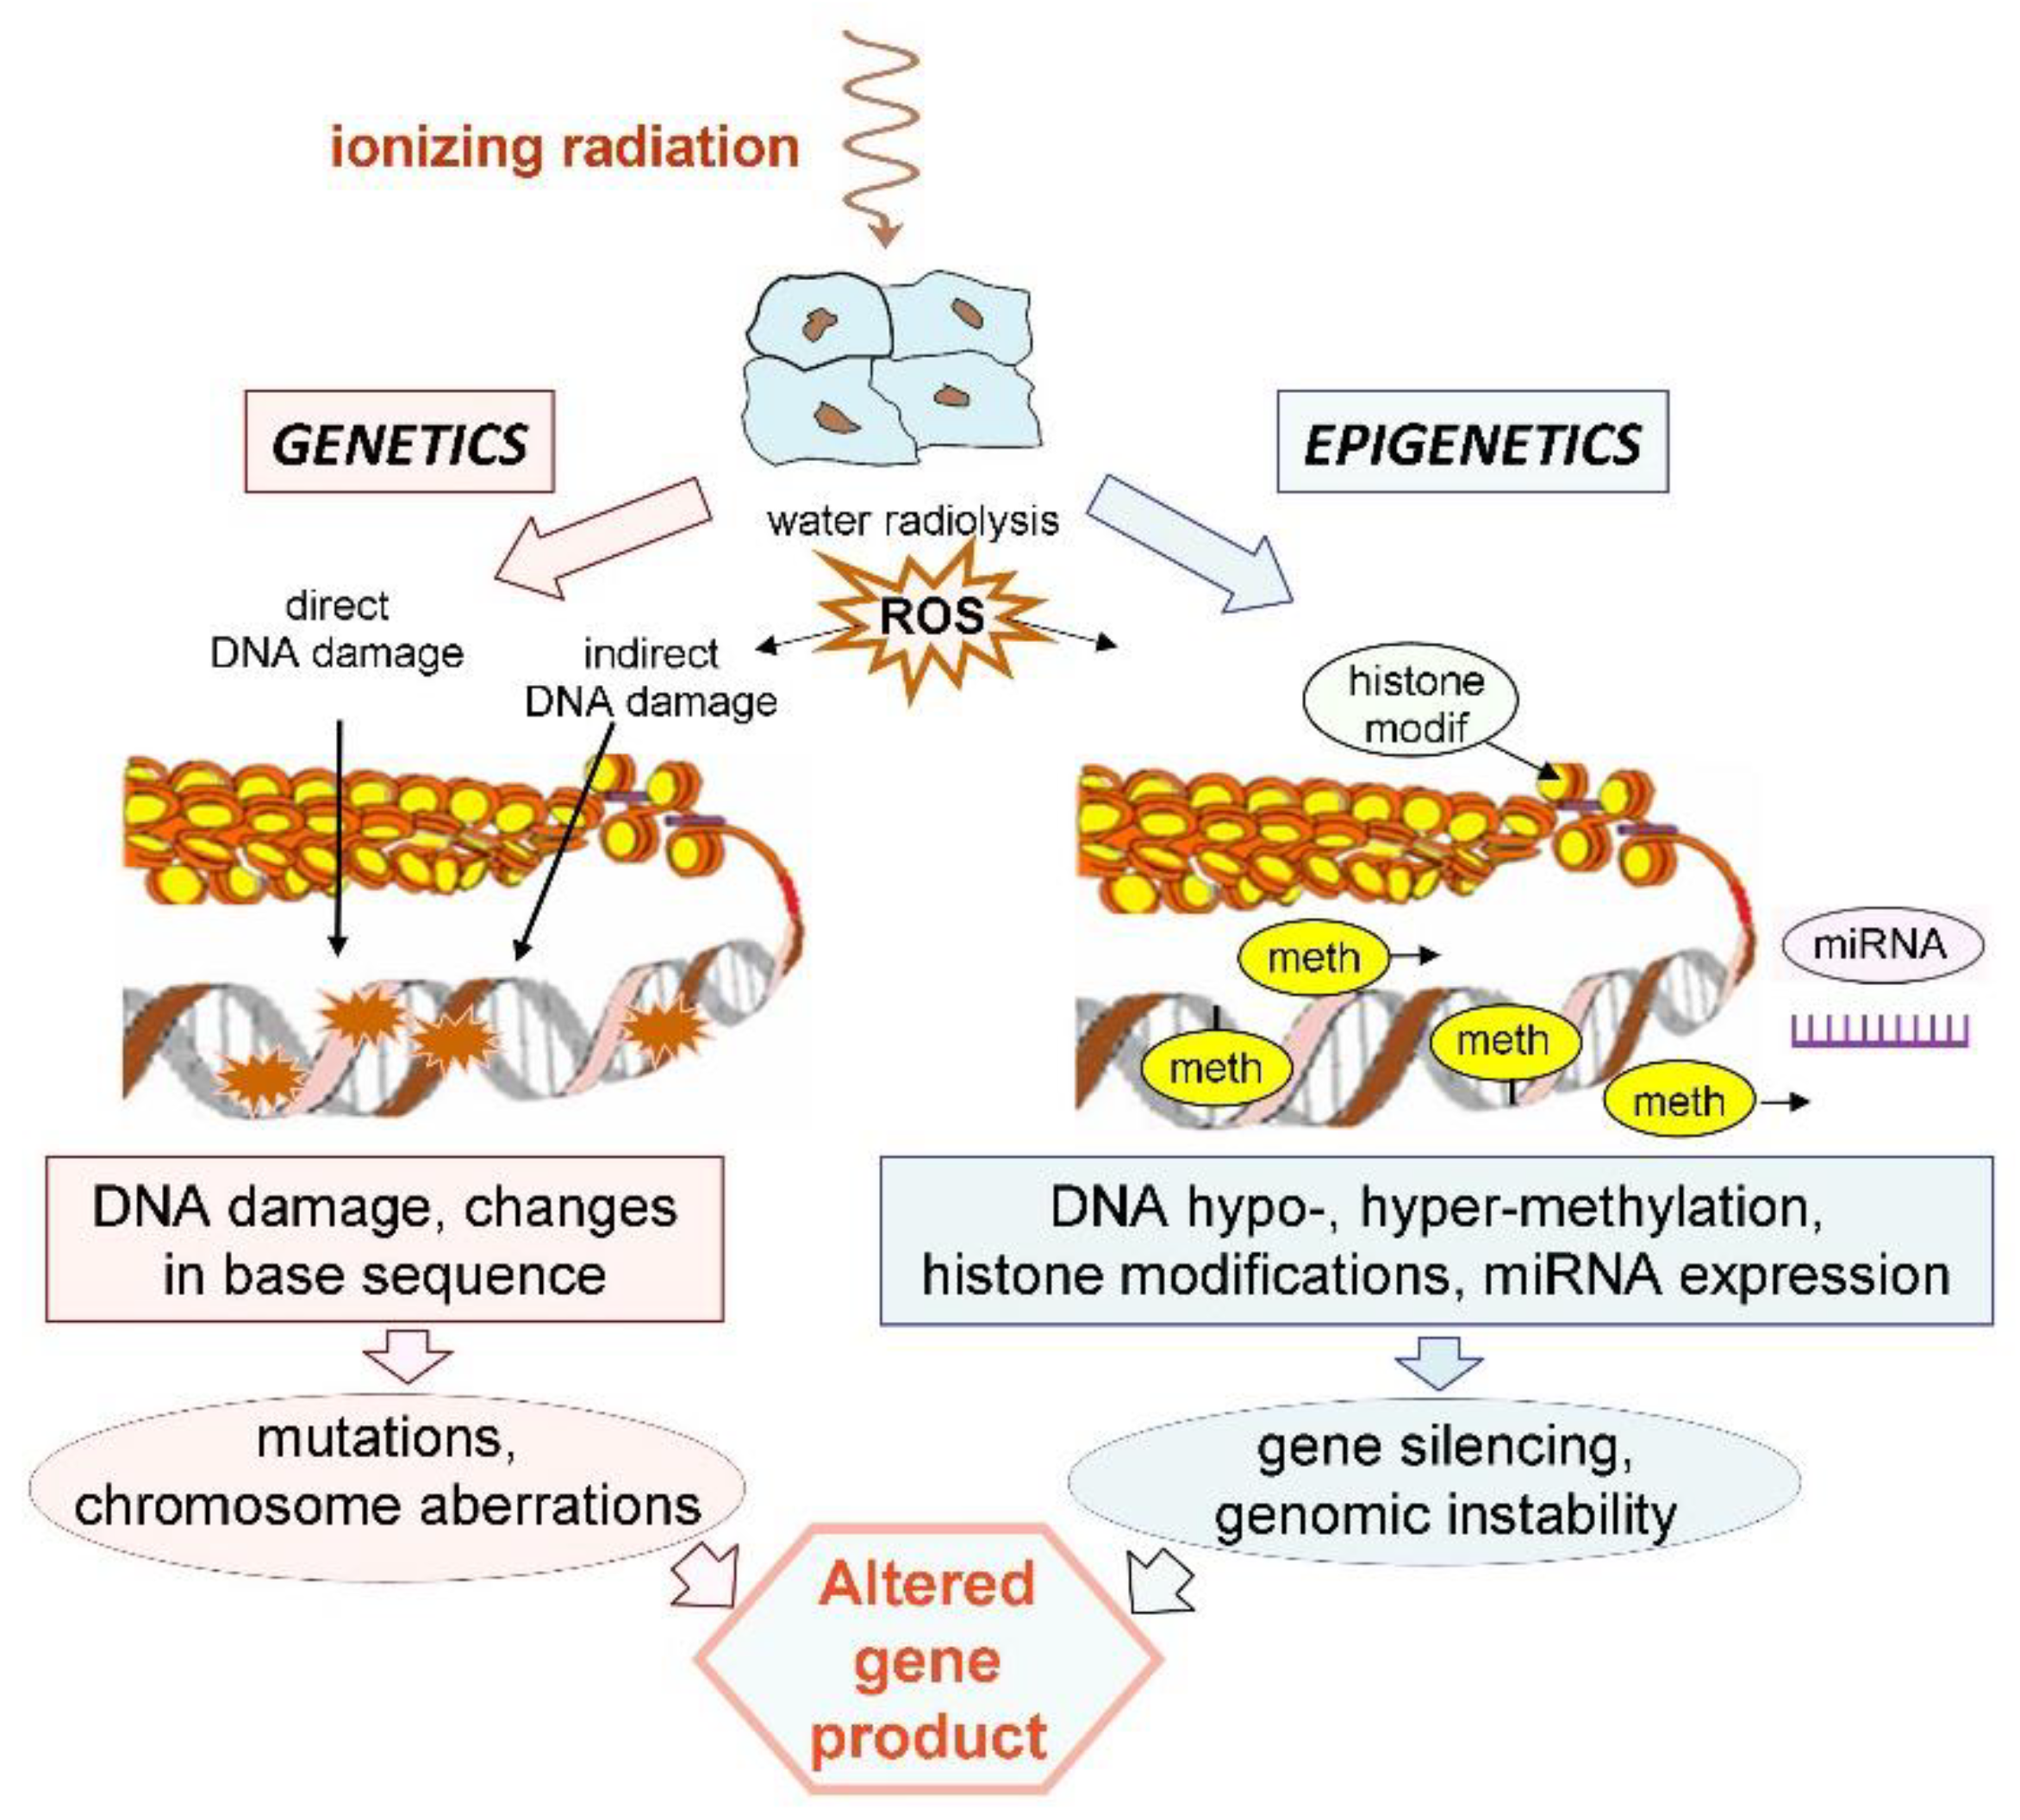 What are the major mechanisms of epigenetic genome modification information